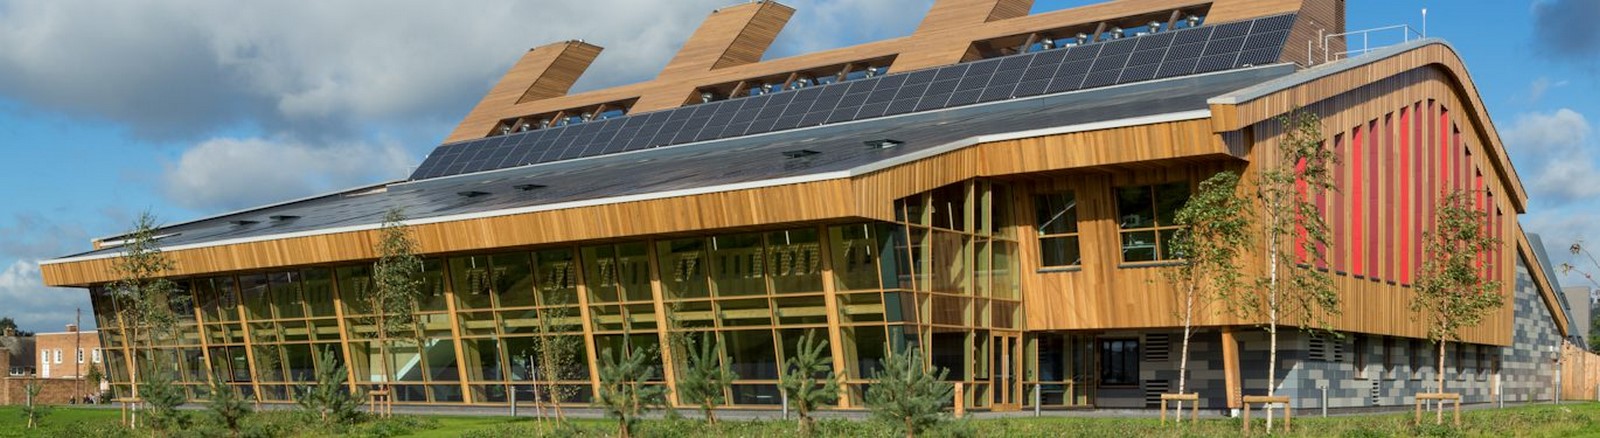 GSK Carbon Neutral Laboratory by Aecom - Sheet3